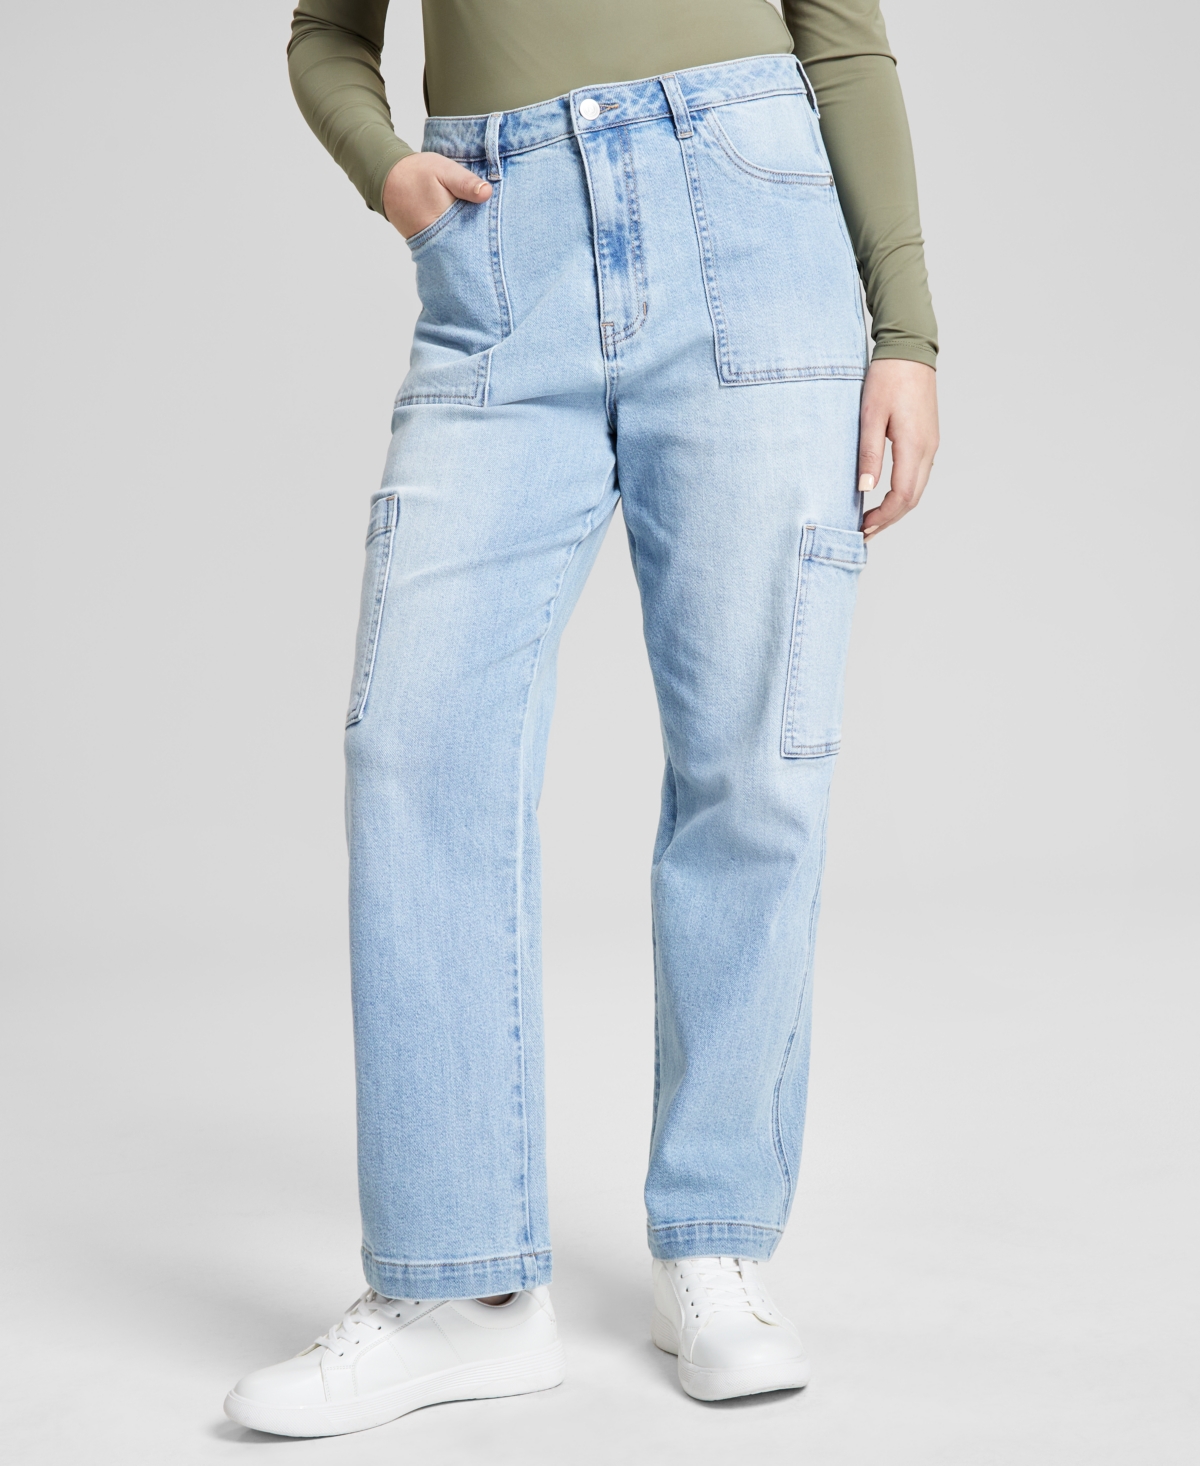 And Now This Women's High Rise Utility Denim Jeans In Dark Wash